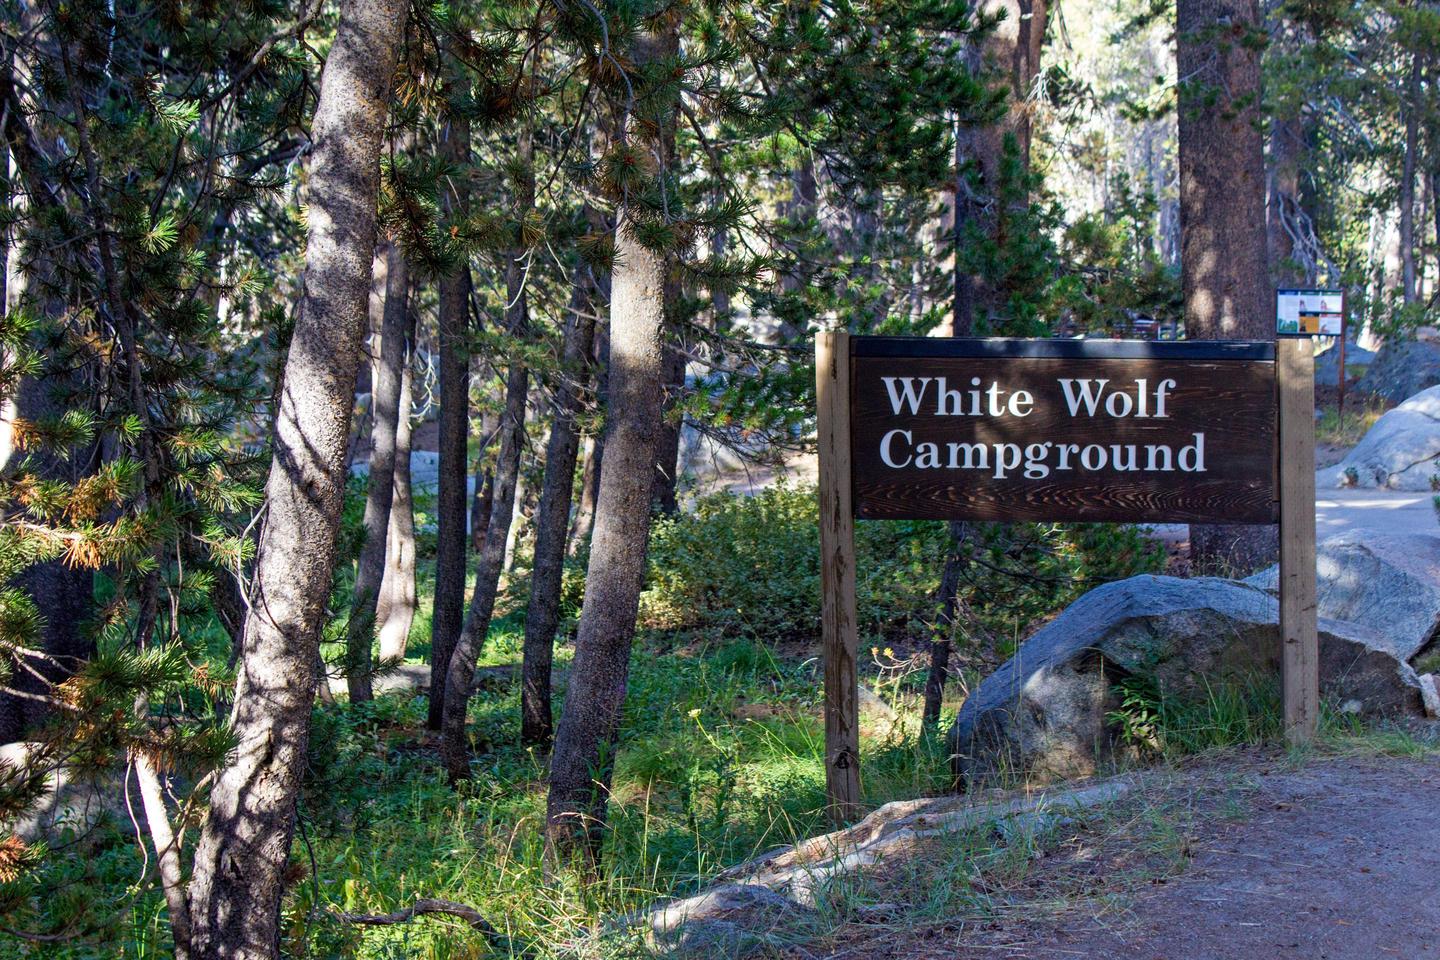 White Wolf Campground Entrance SignThe entrance to White Wolf Campground